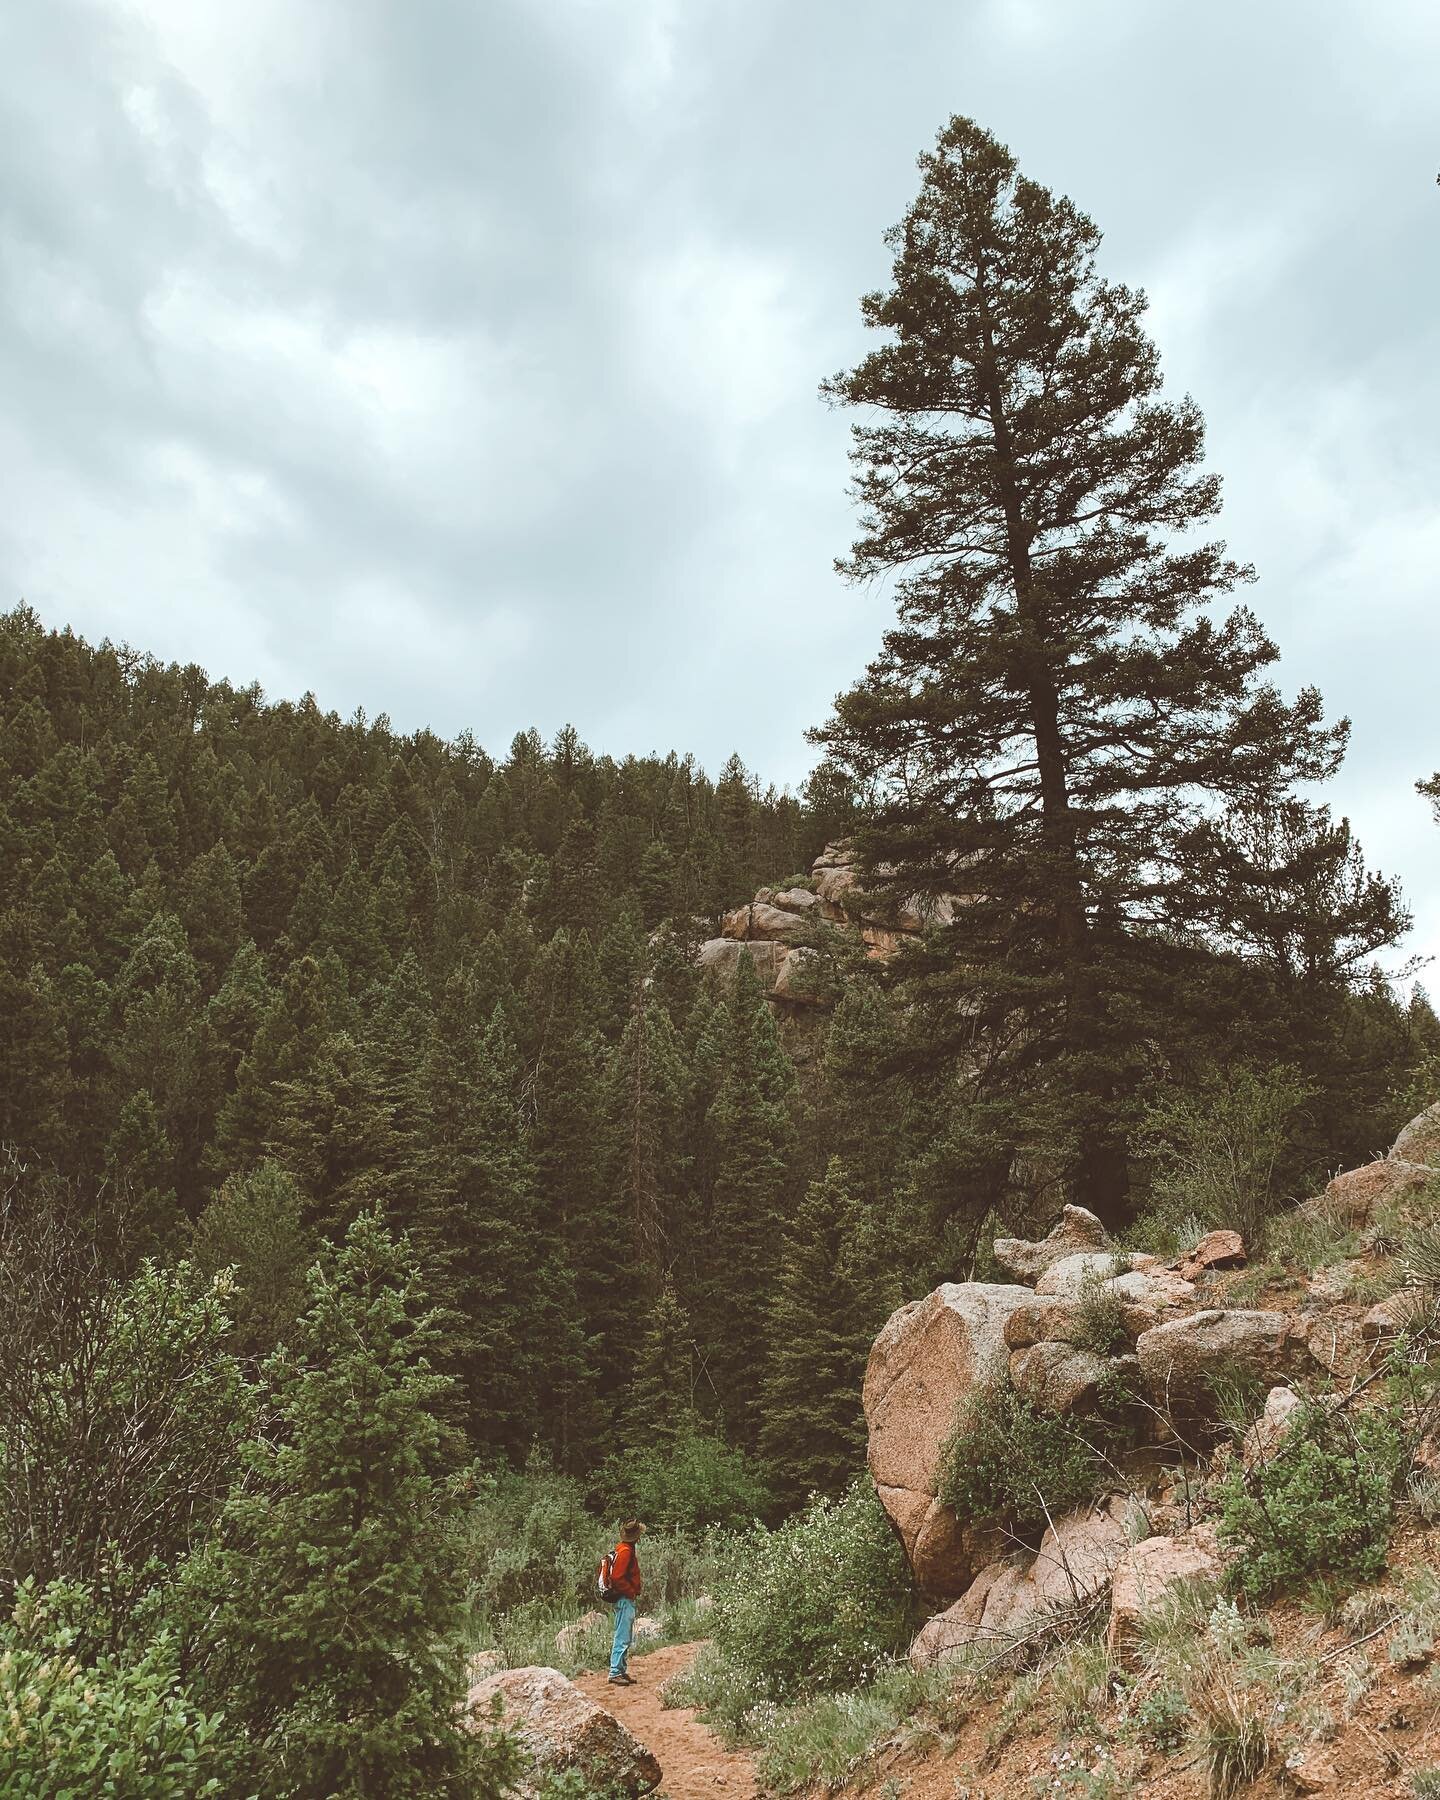 Itching for a scenic walk? There are a ton of incredible hiking trails a short drive away from us just waiting for you to explore!
&bull;
&bull;
&bull;
#hiking #hikingadventures #colorado #coloradoairbnb #mountains #coloradosprings #victorcolorado #s